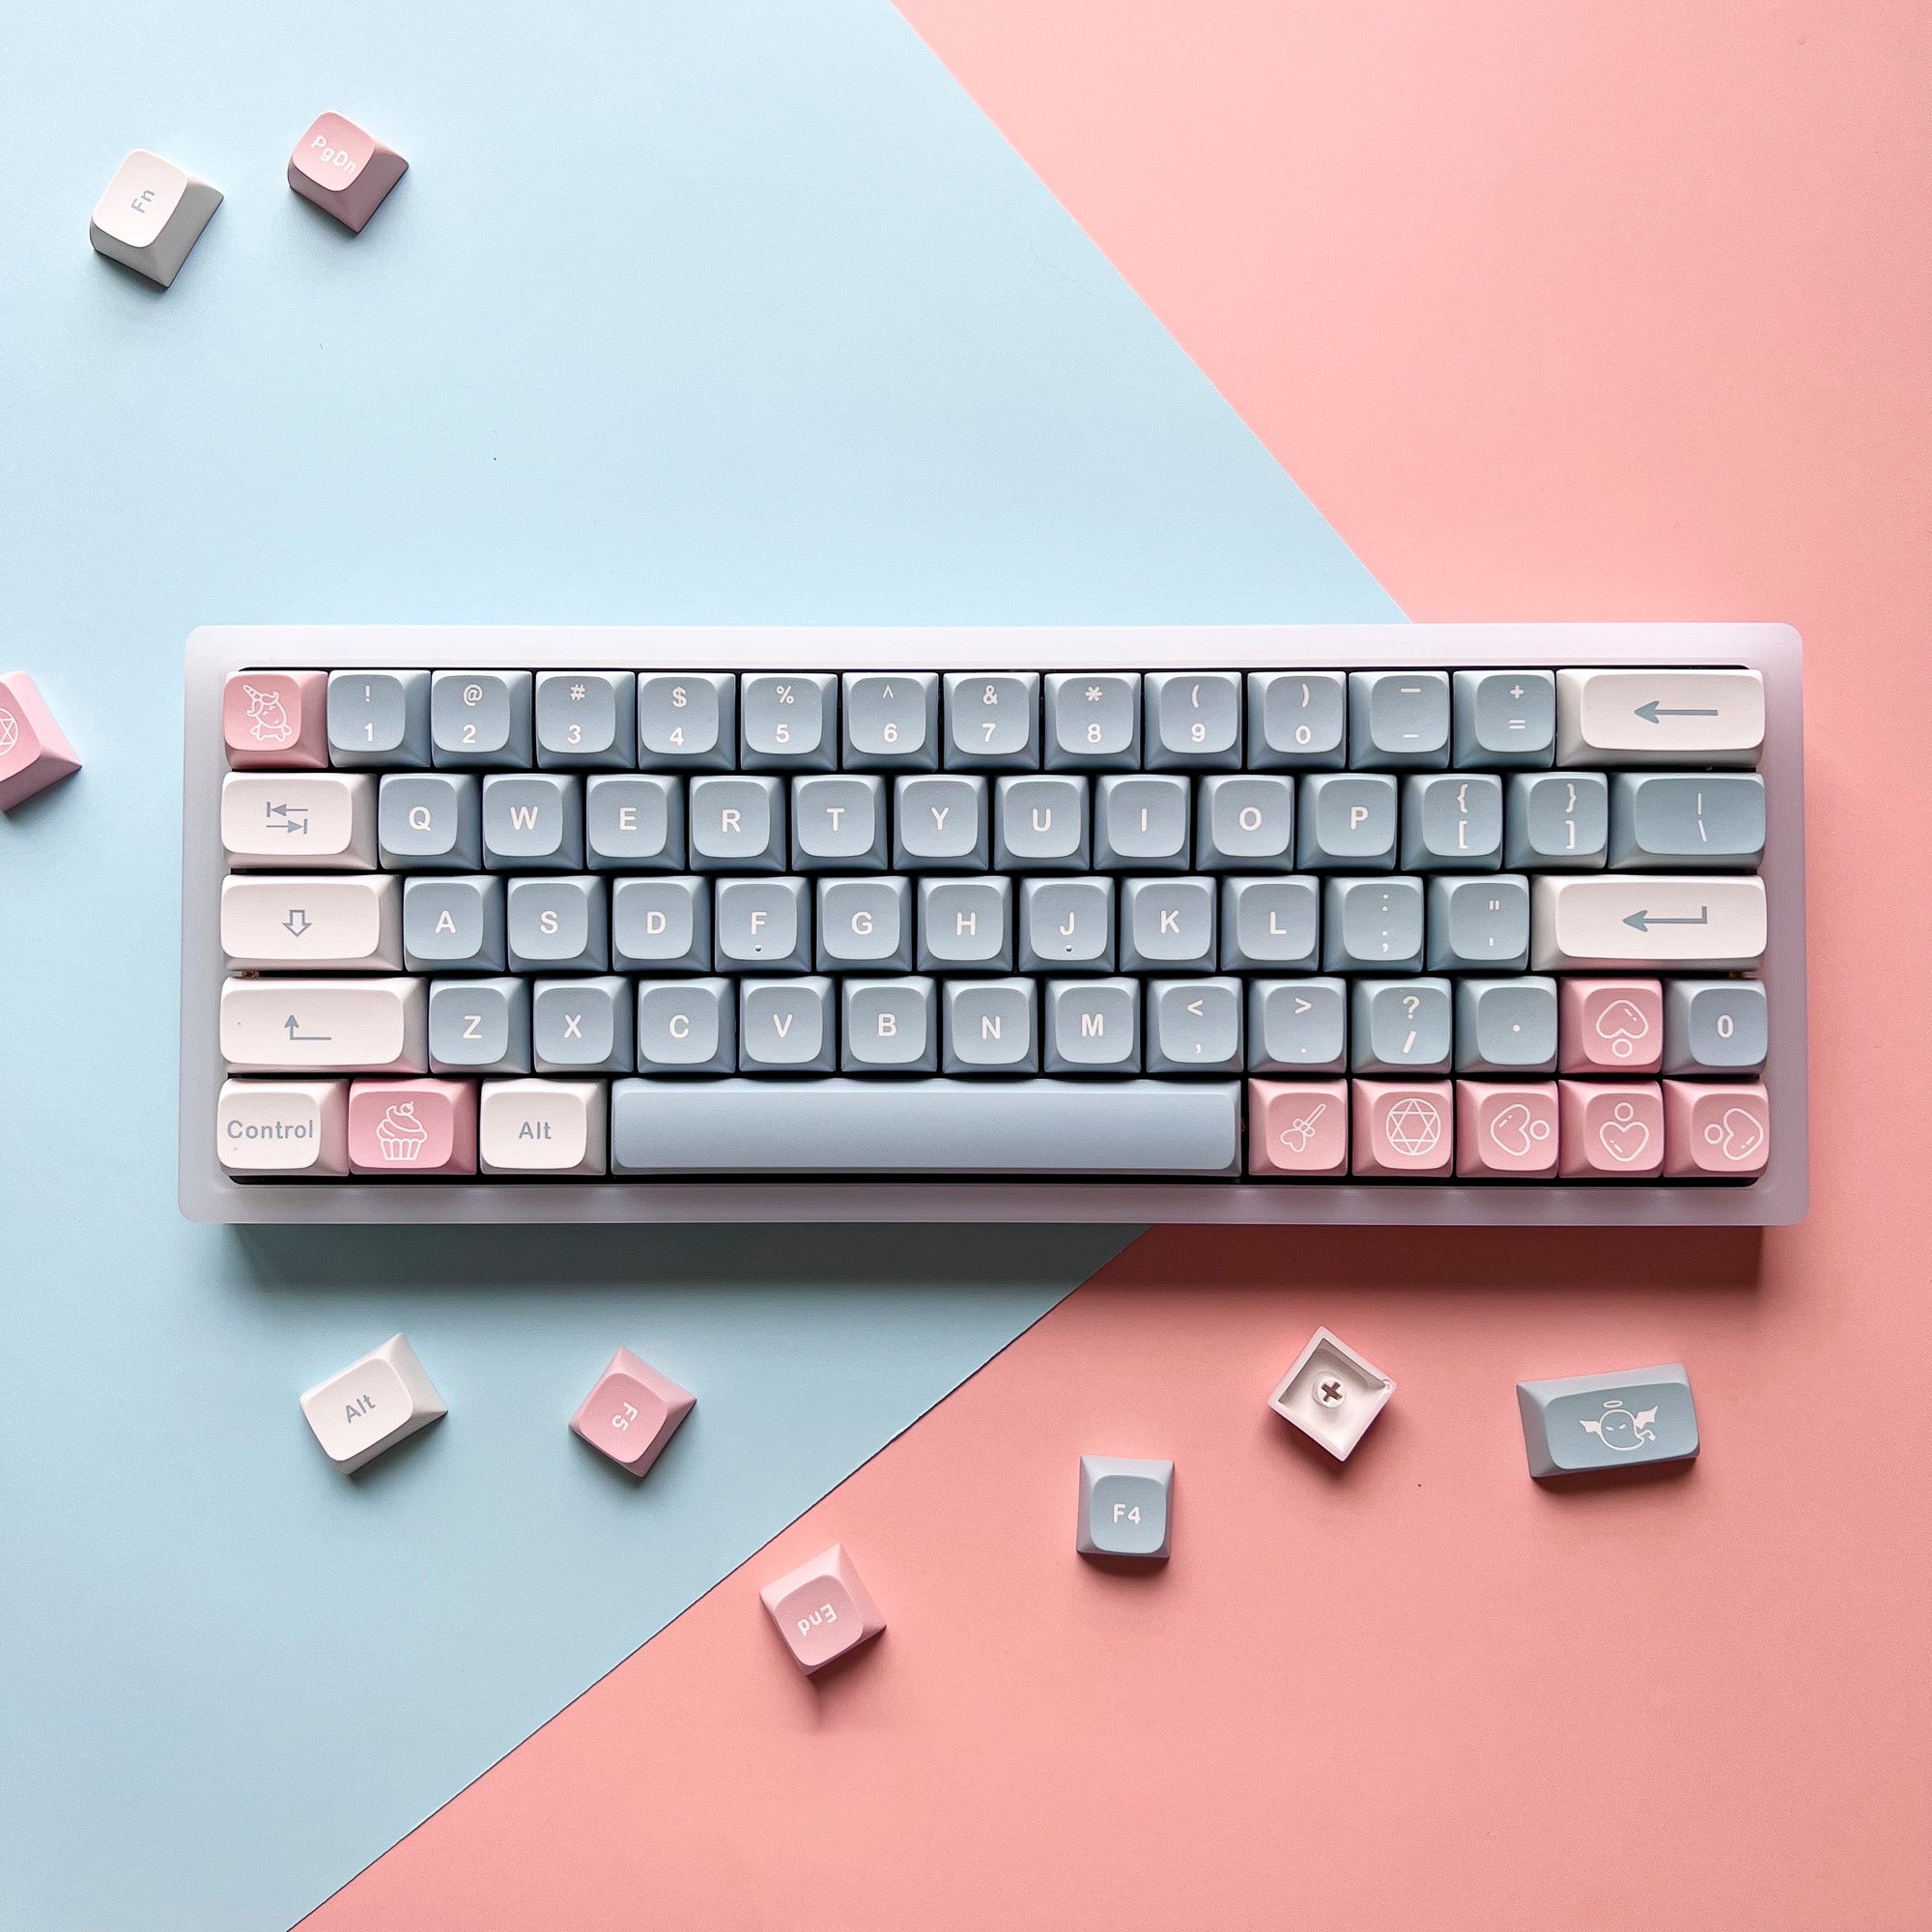 Cute keycaps set, Buy from Planter&Co